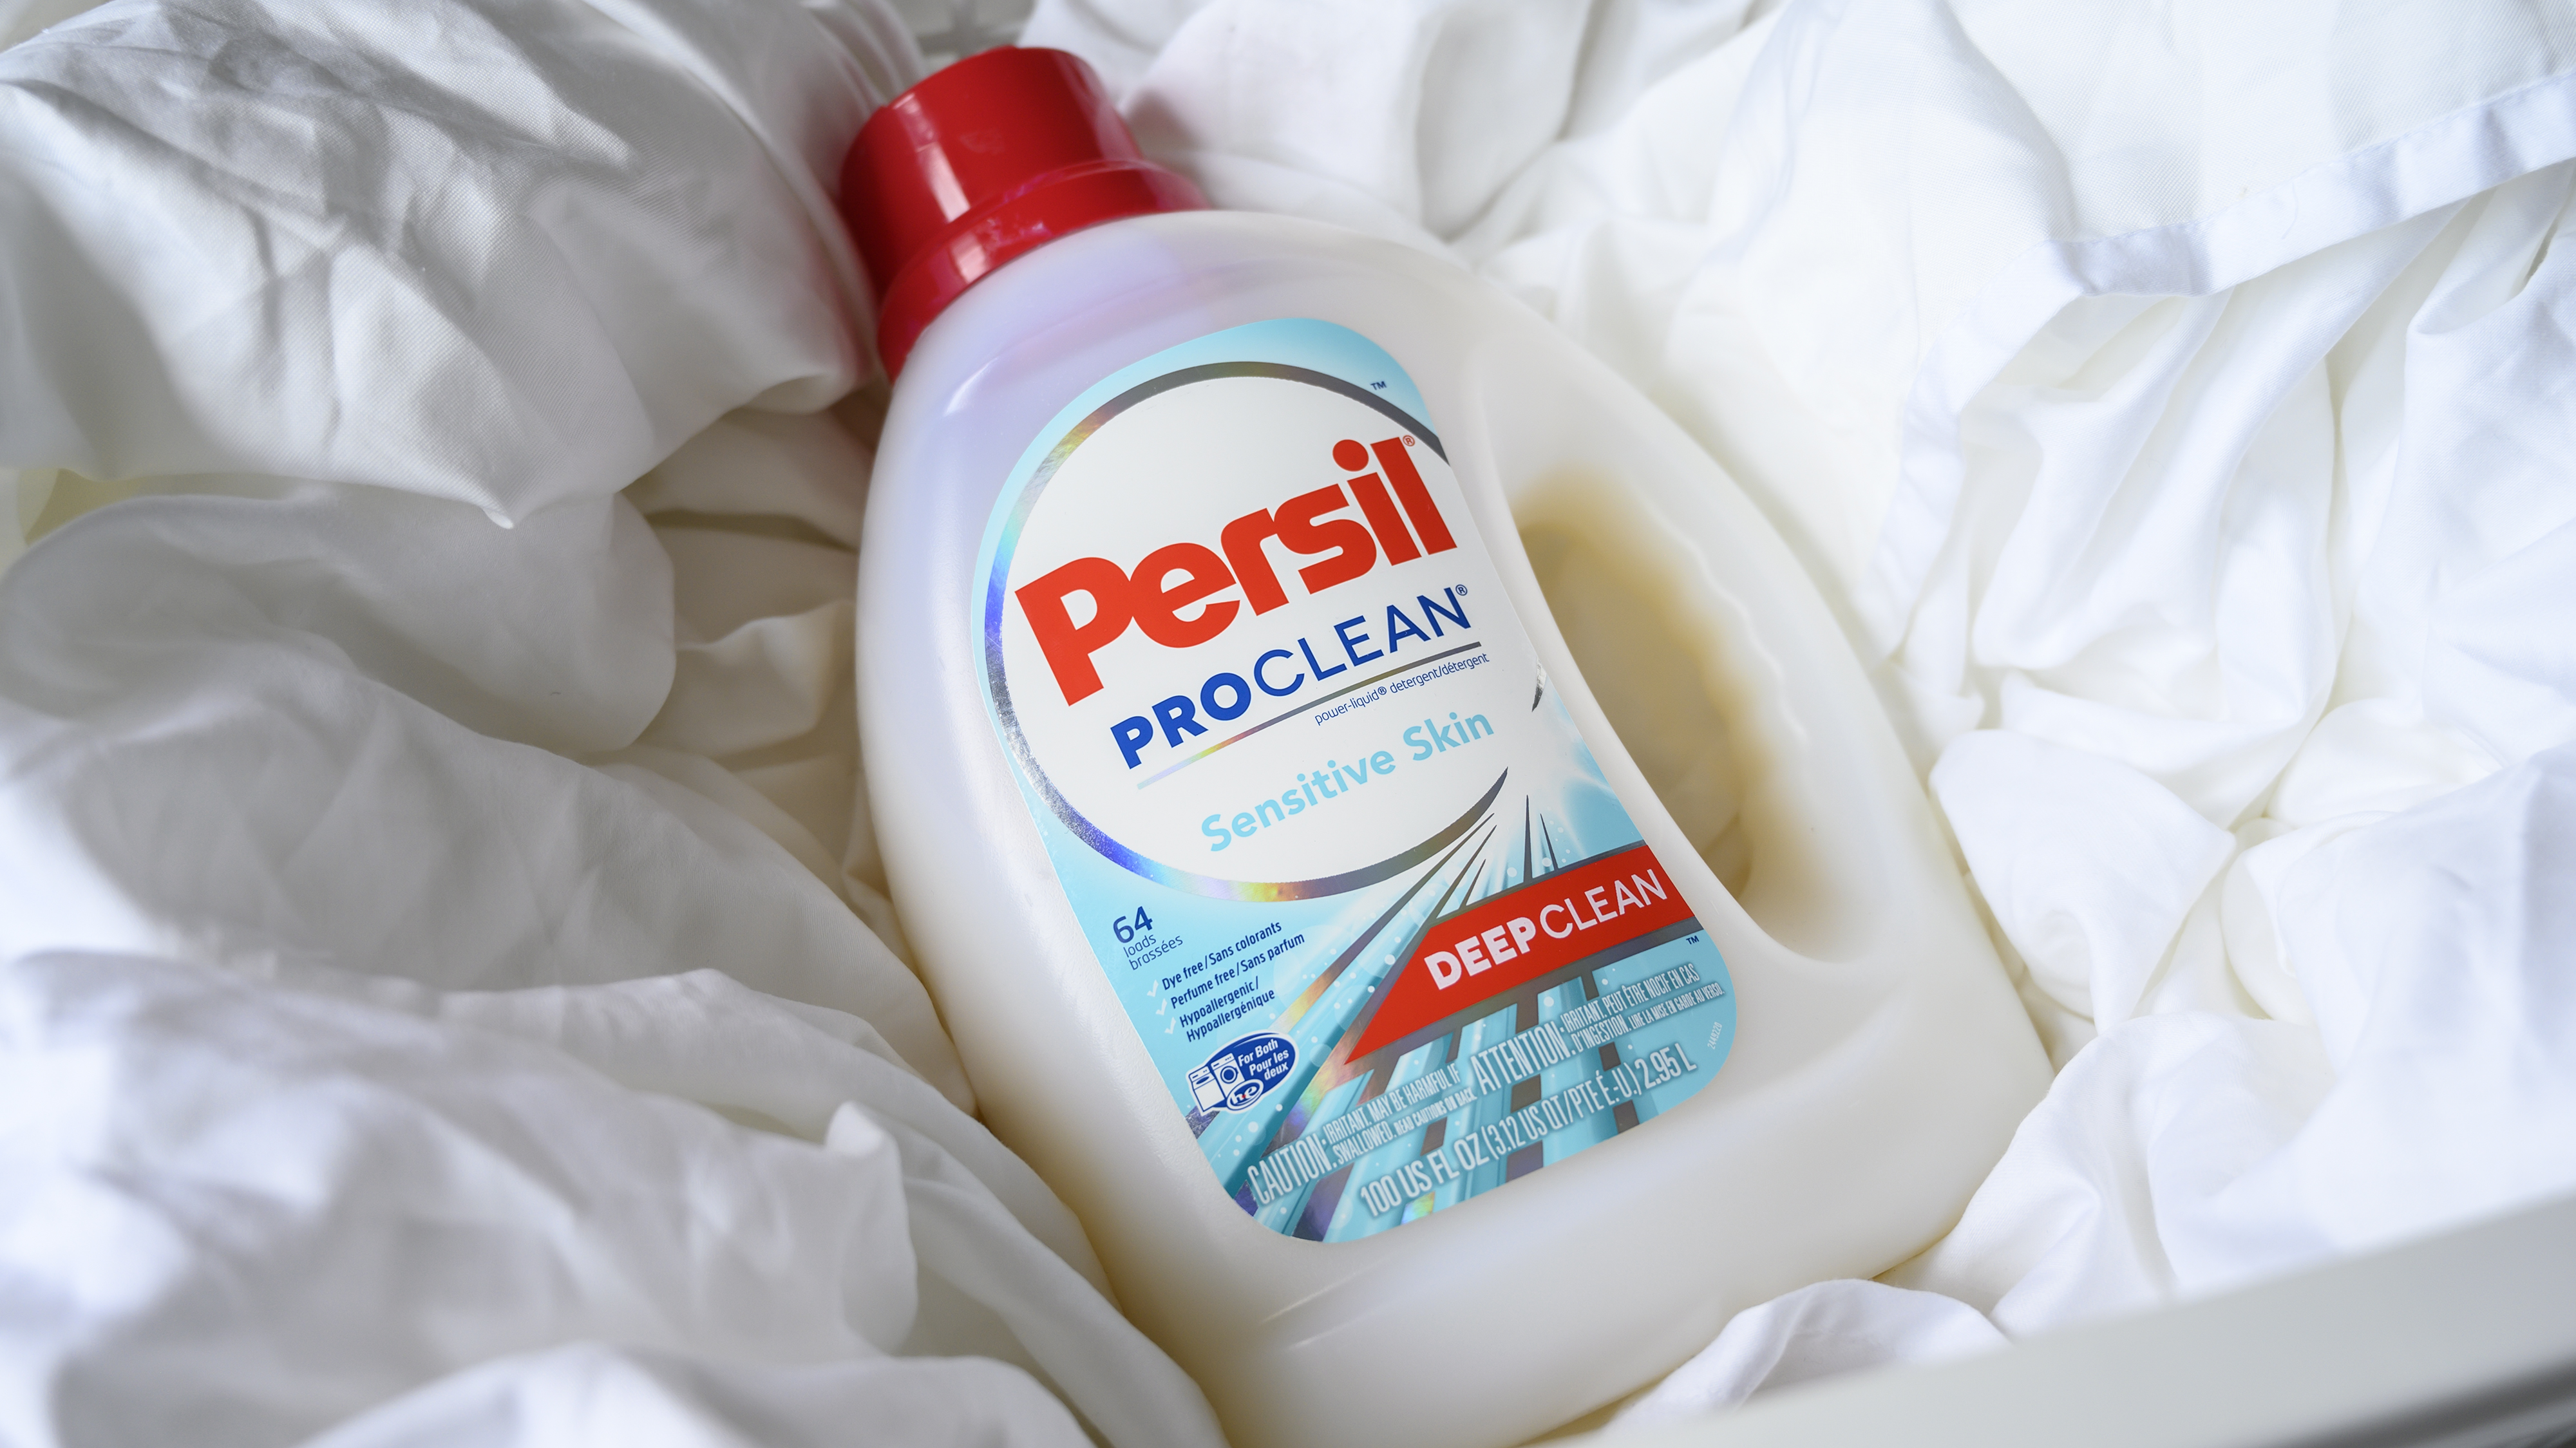 Persil ProClean Sensitive Skin removed the most stains.